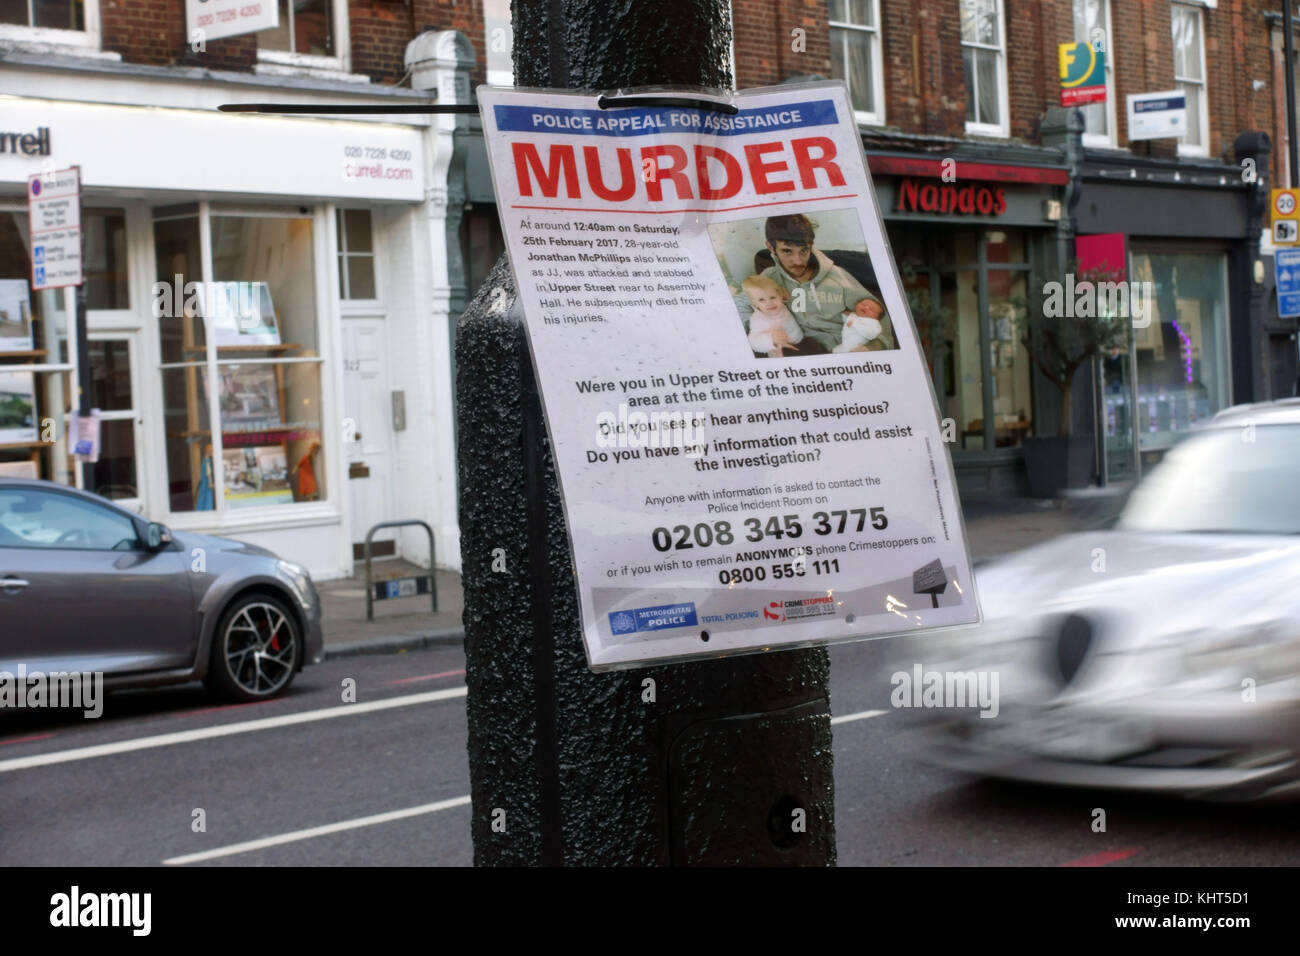 Metropolitan Police appeal for help with murder investigation in Islington, London Stock Photo